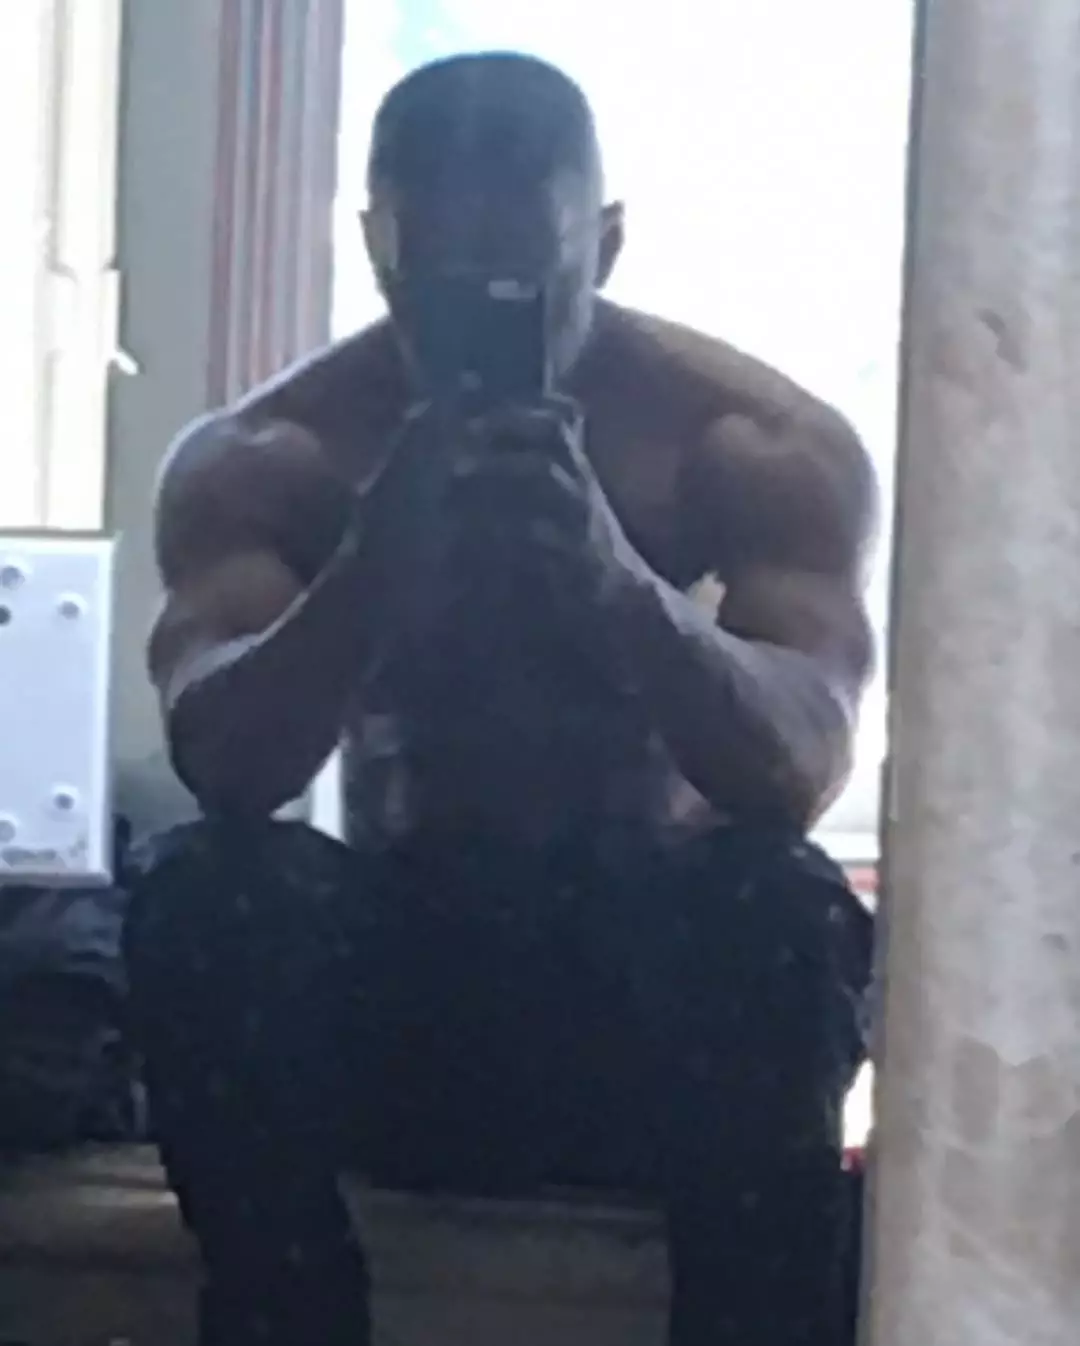 Jamie Foxx has been bulking up to play Mike Tyson.